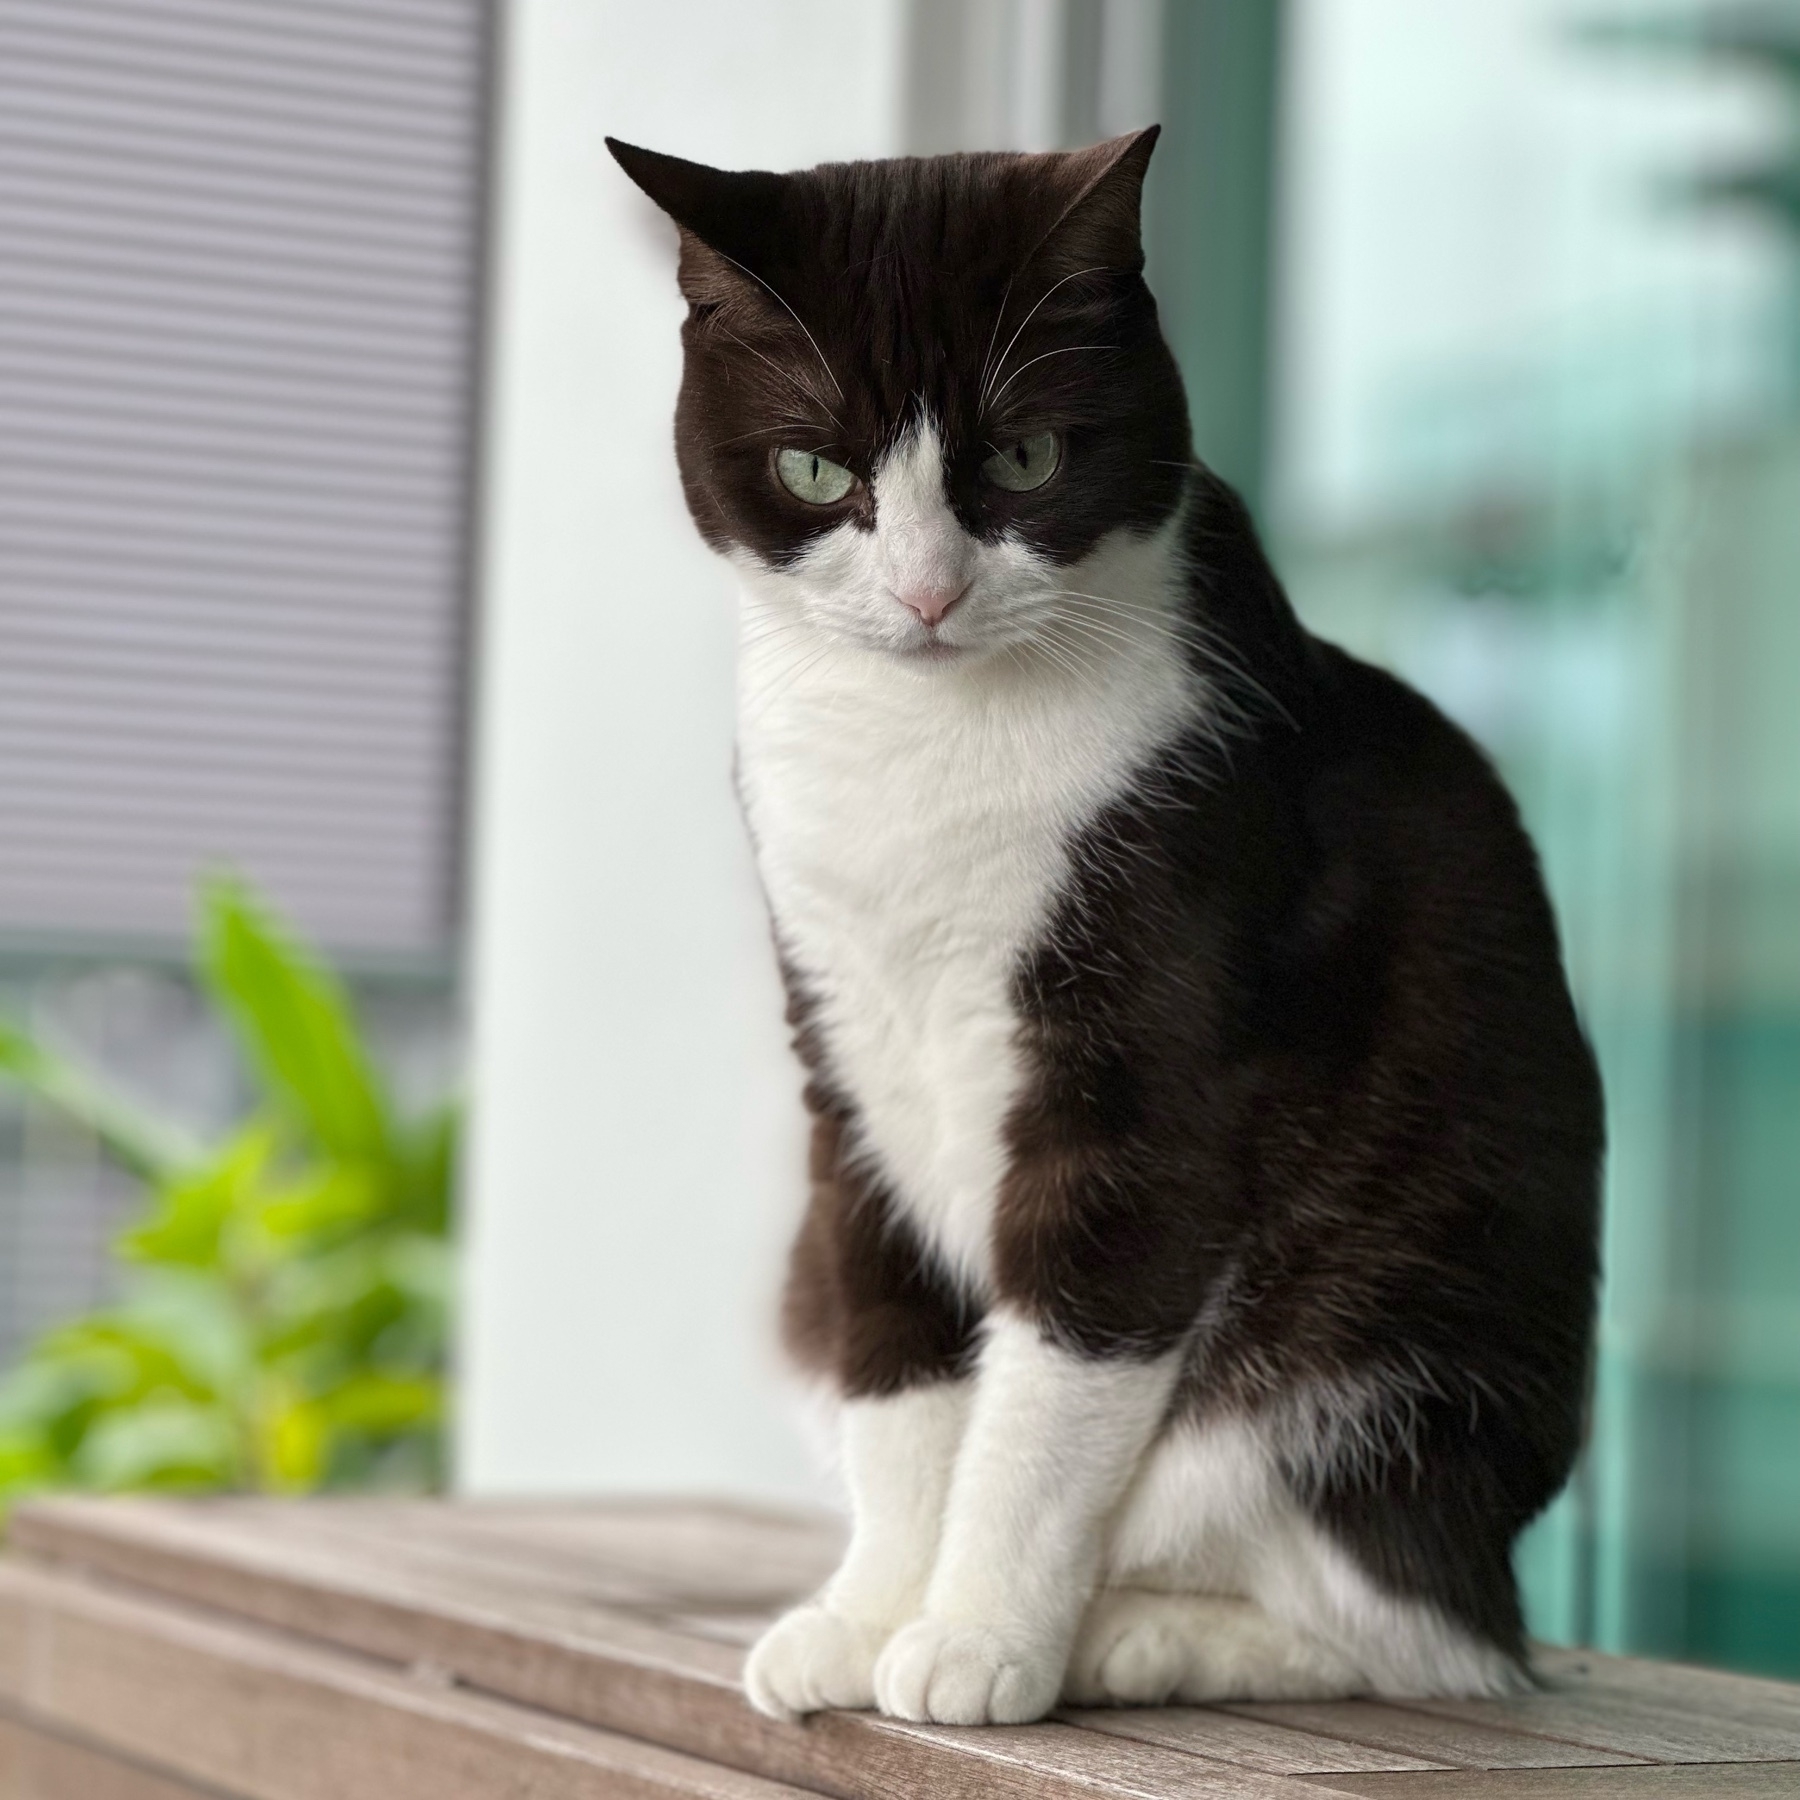 A black and white tuxedo cat sitting upright on an outside table glaring at the camera. Her body and head are black but her belly, nose, chin and lower half of her paws are white. There’s a green plant off to the left.